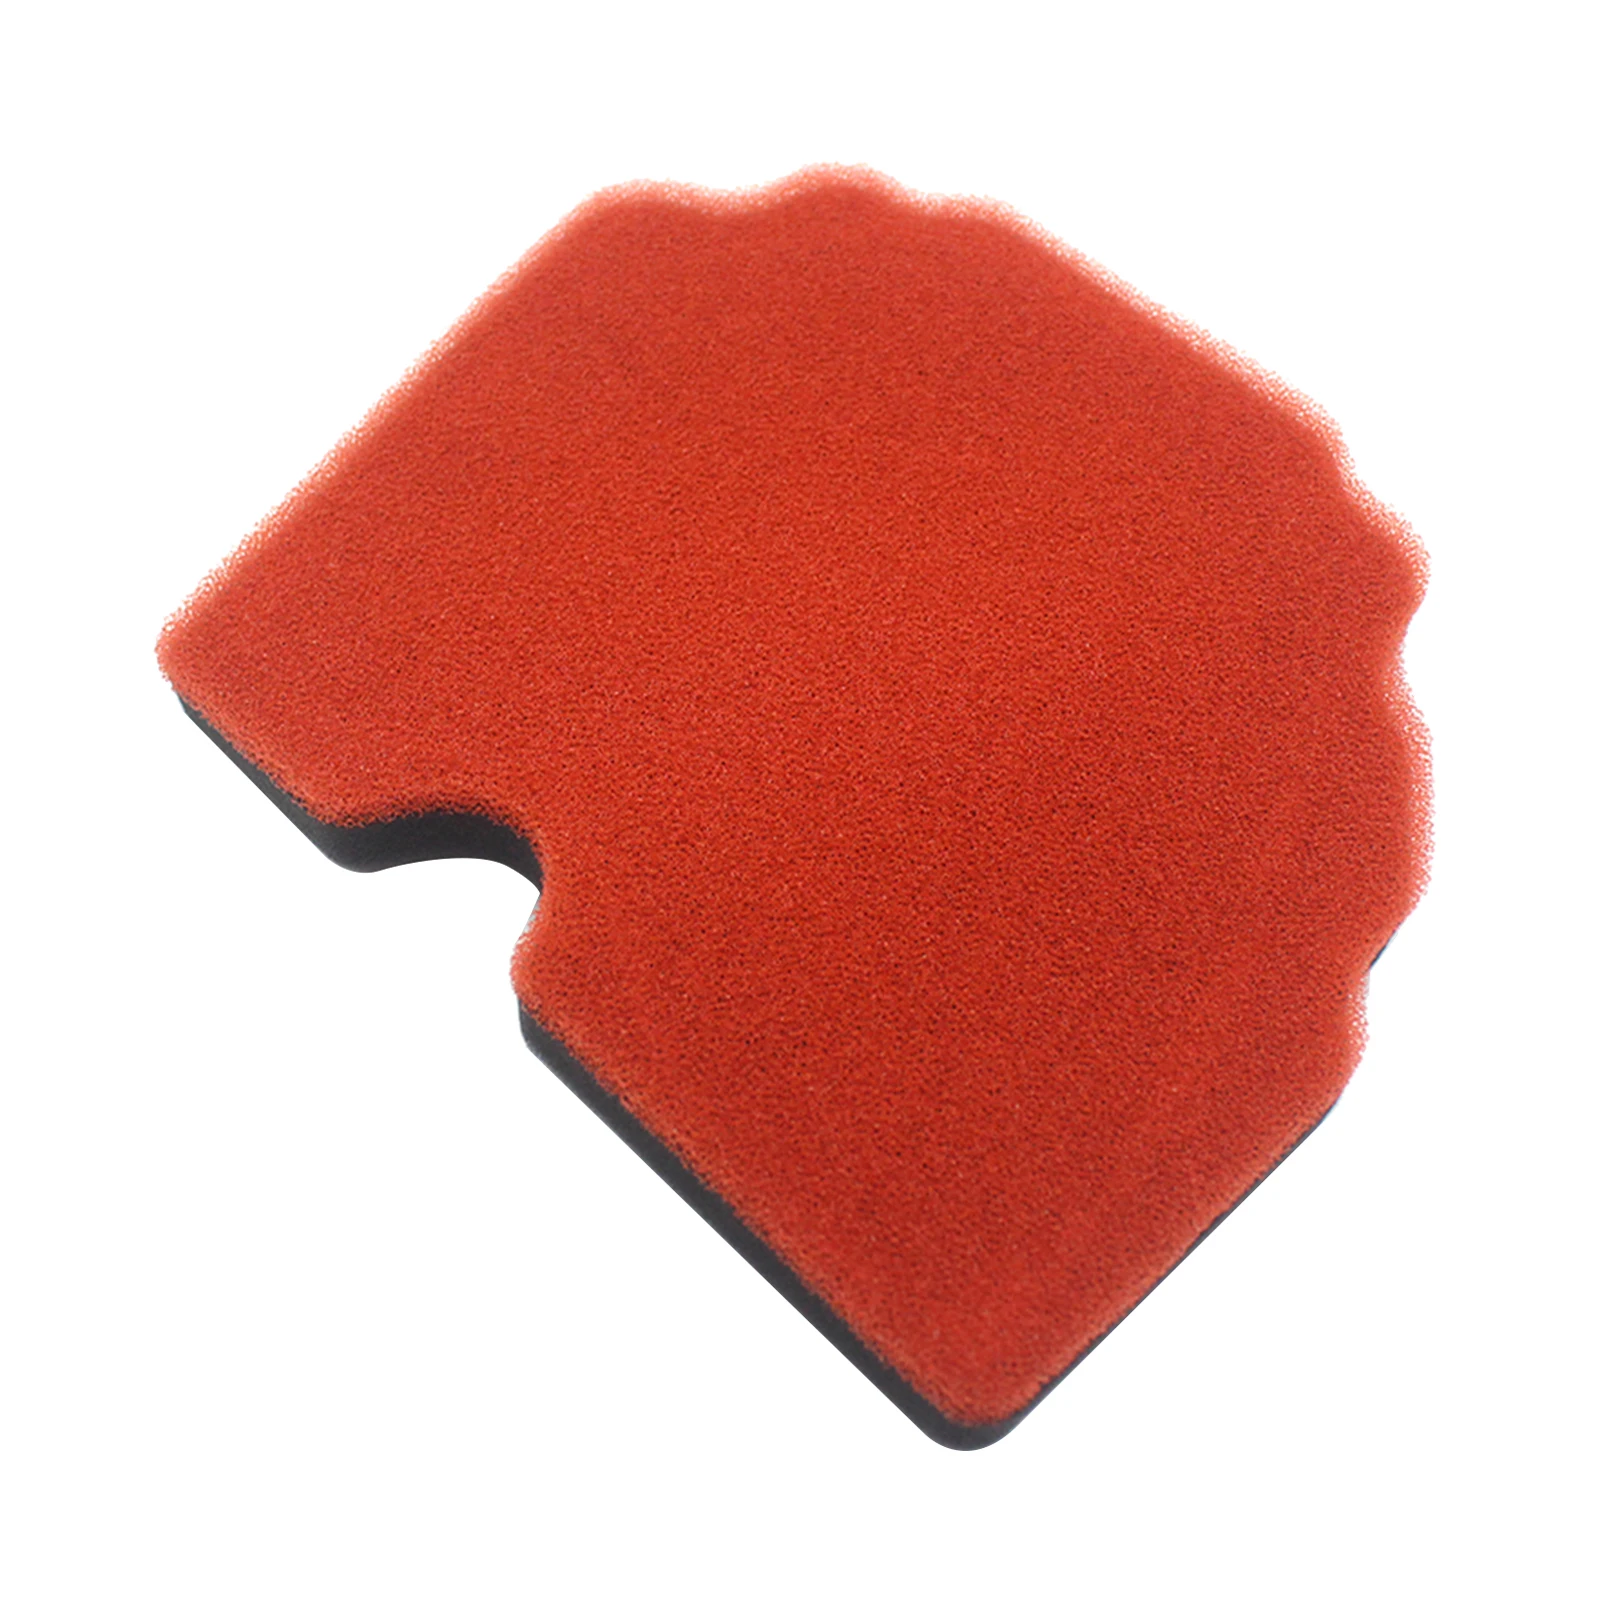 Motorcycle Air Intake Filter Sponge Fit for Benelli TRK502 TRK 502 TRK502X TRK 502X Air Filter Motorbike Cleaner Accessories